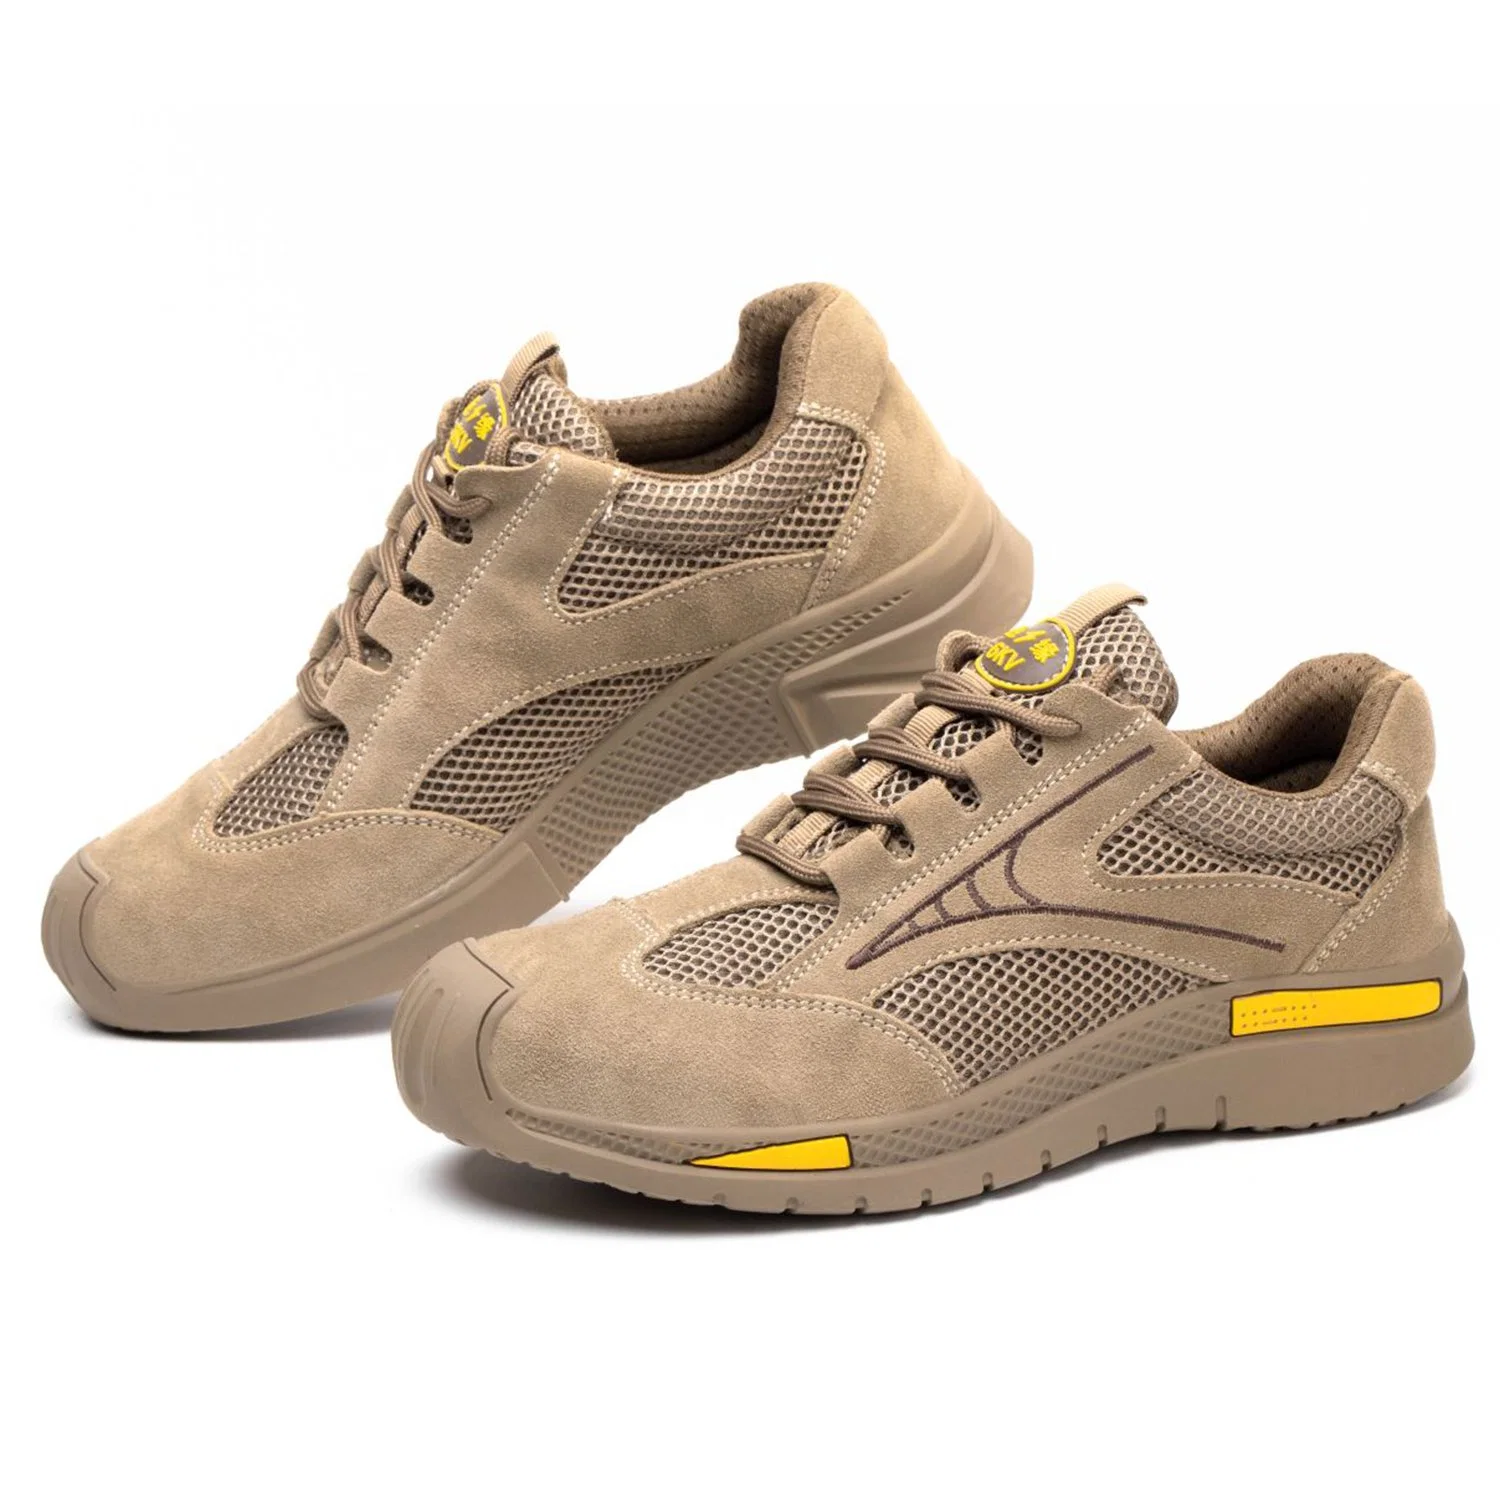 Brown Color Sport Sneaker Casual Shoes for Men and Women Work Safety